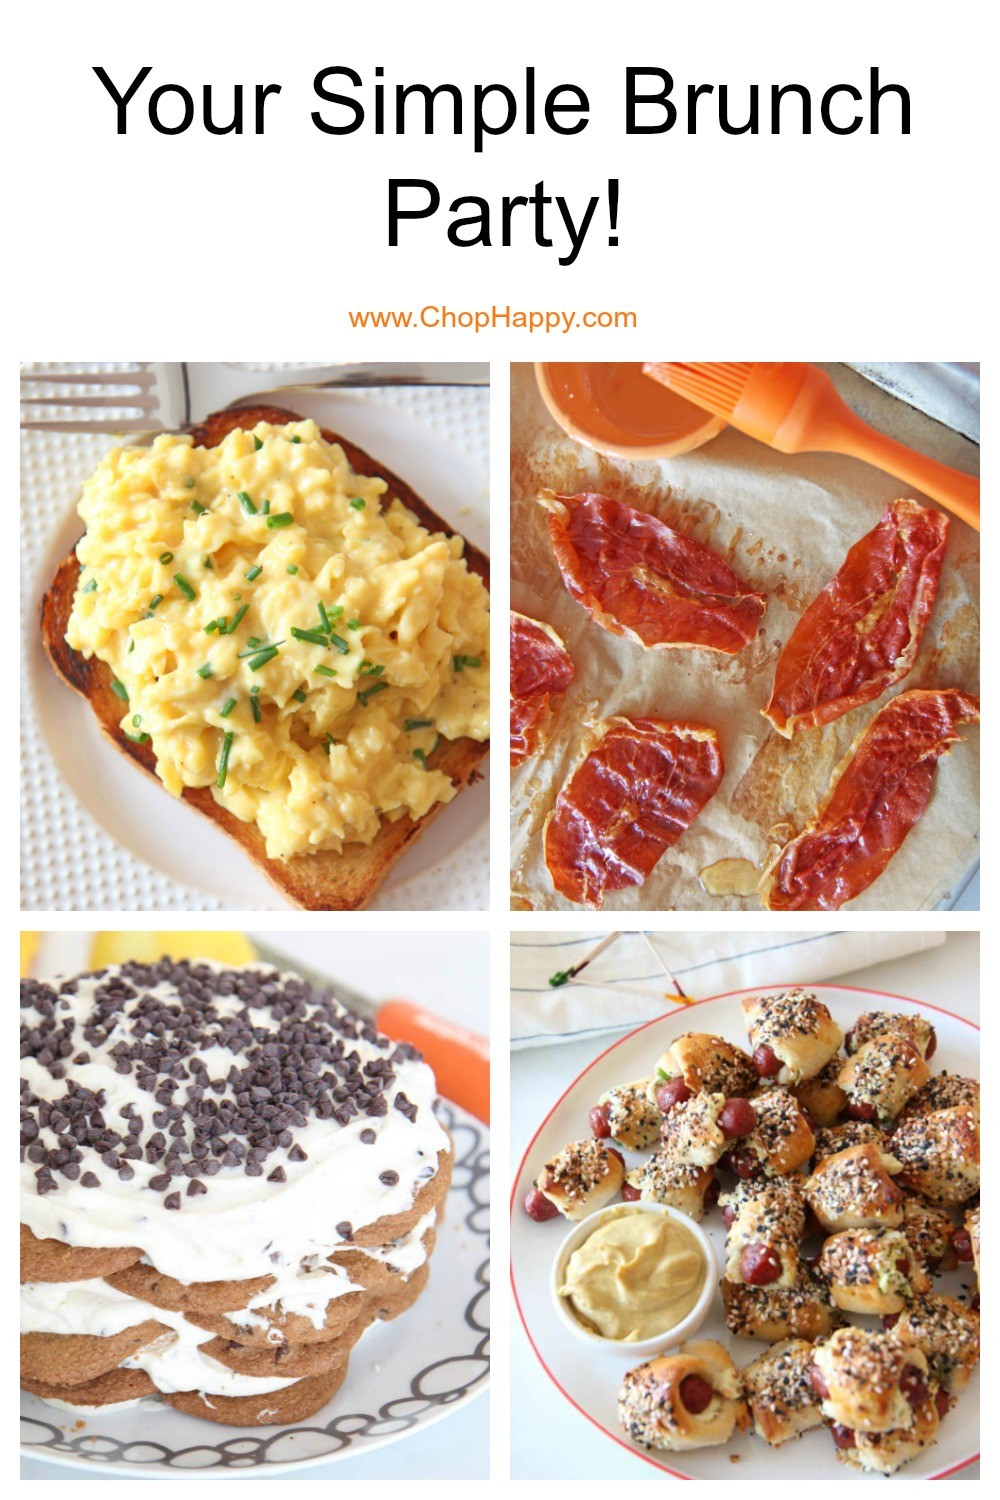 Your Simple Brunch Party (stress free happy eats). Creamy scrambled eggs, crispy prosciutto, everything bagel pigs in blanket, and cookie cake. Happy Cooking! www.ChopHappy.com #brunchrecipe #breakfast